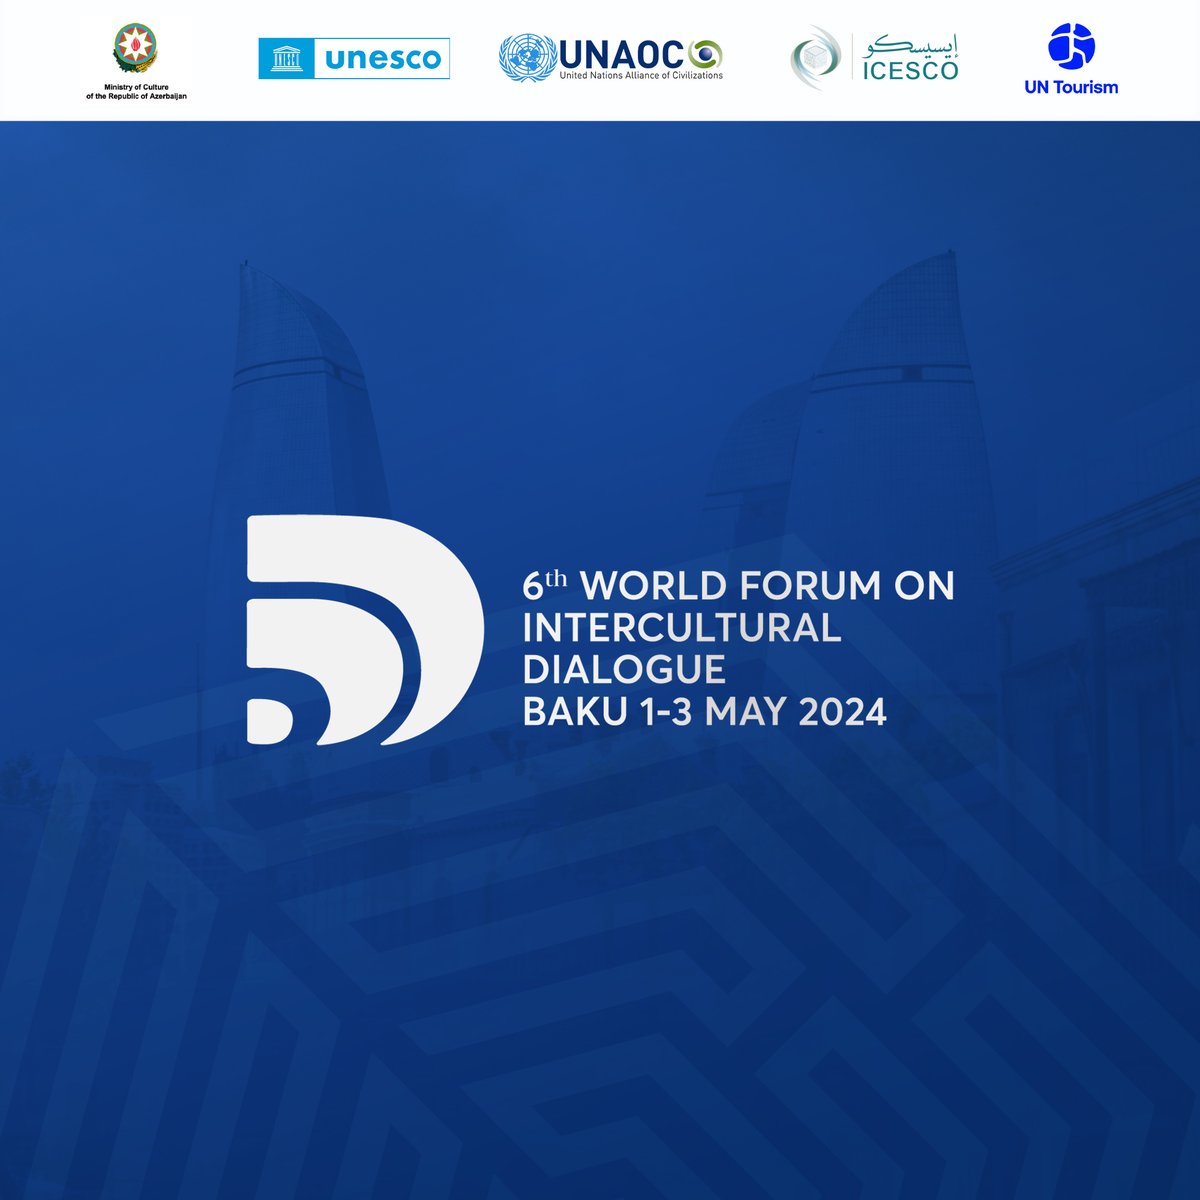 The 6th World Forum of Intercultural Dialogue will be held in Azerbaijan on May 1-3, under the theme 'Dialogue for Peace and Global Security: Cooperation and Interconnectivity.'

Details: t.ly/vcrz8

#Azerbaijan #WFID6 #BakuProcess2024 #PeaceThroughDialogue #forum